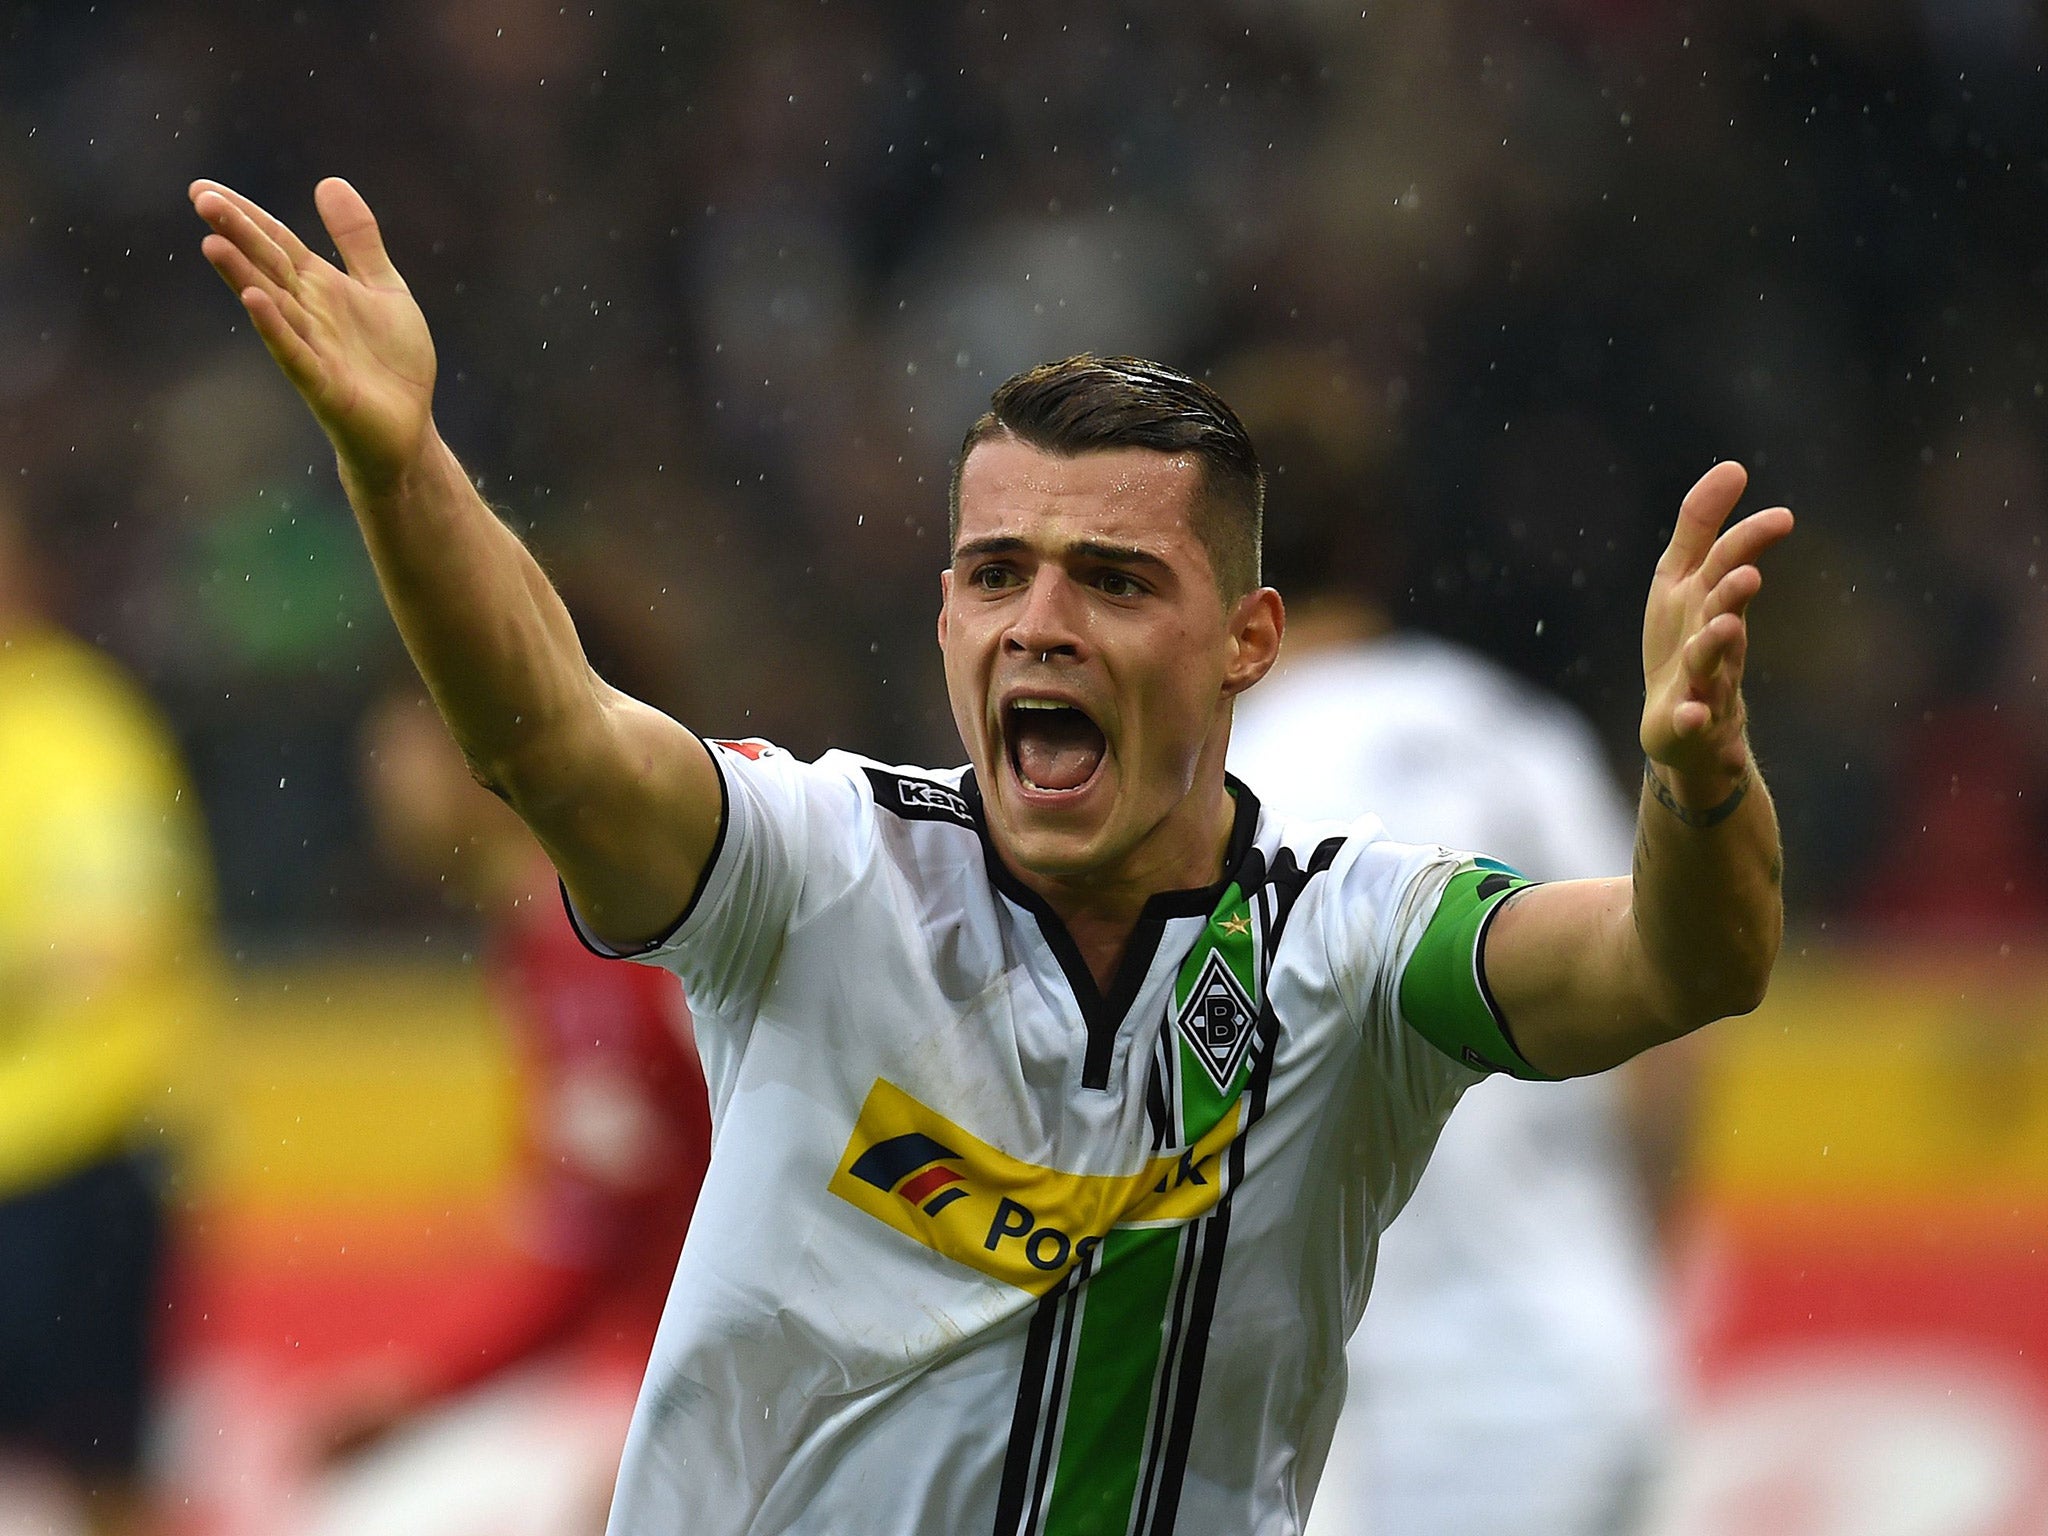 Granit Xhaka will be confirmed as an Arsenal player in the next few days